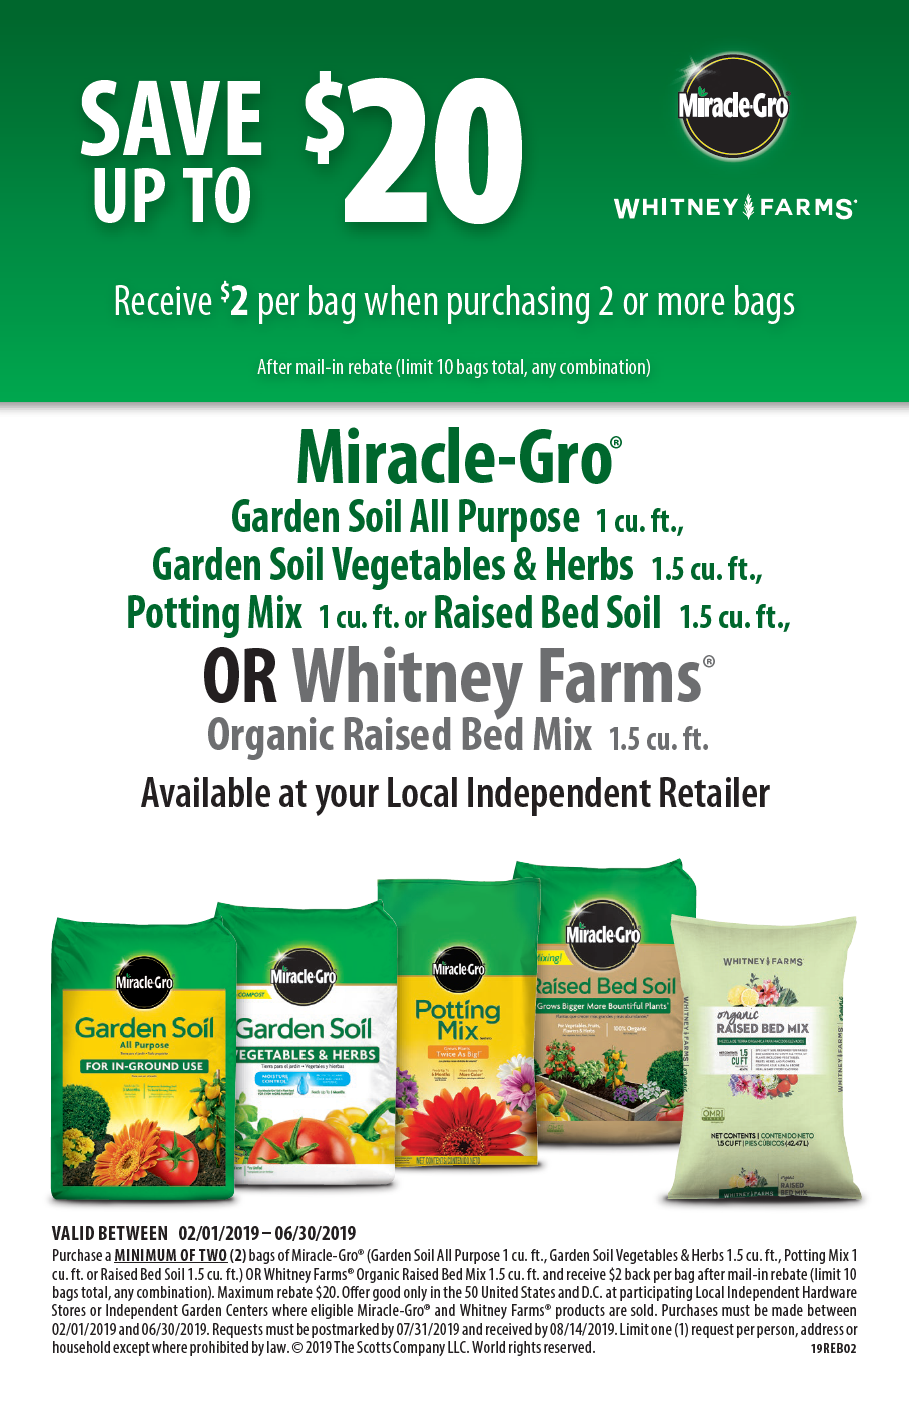 scotts-miracle-gro-all-star-backyard-sweepstakes-todd-s-freebies